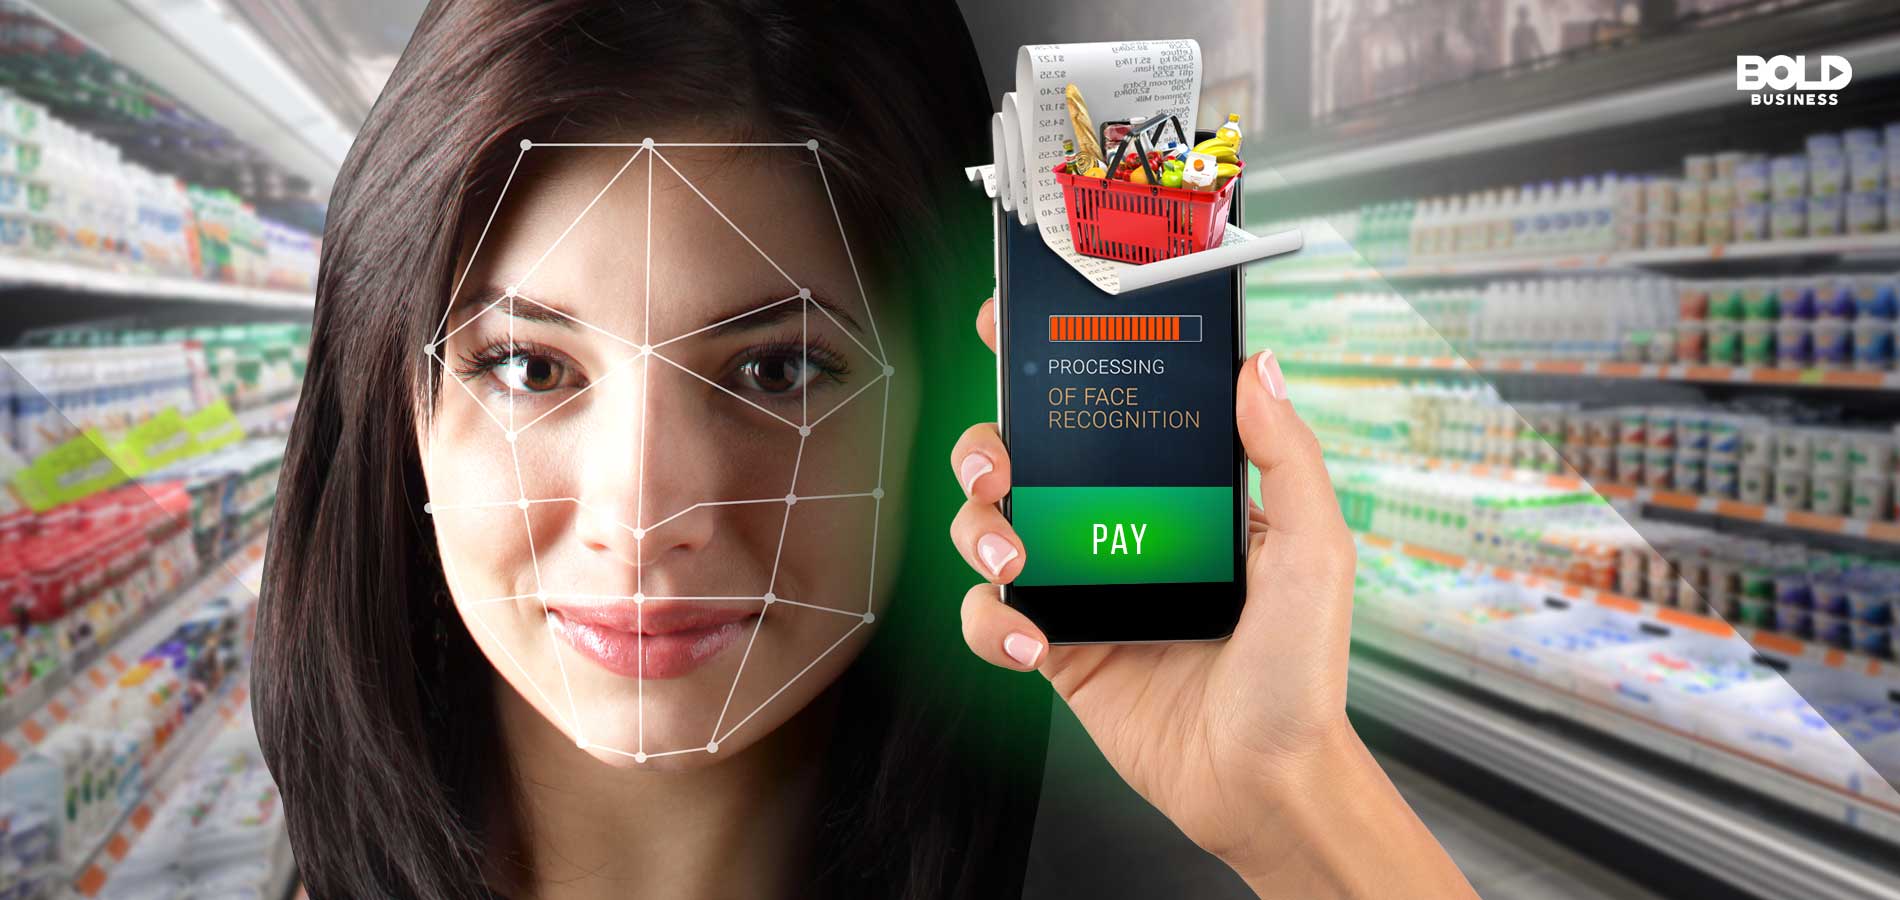 Biometric Wallets and Frictionless Payments: A Glimpse at the Future of Money